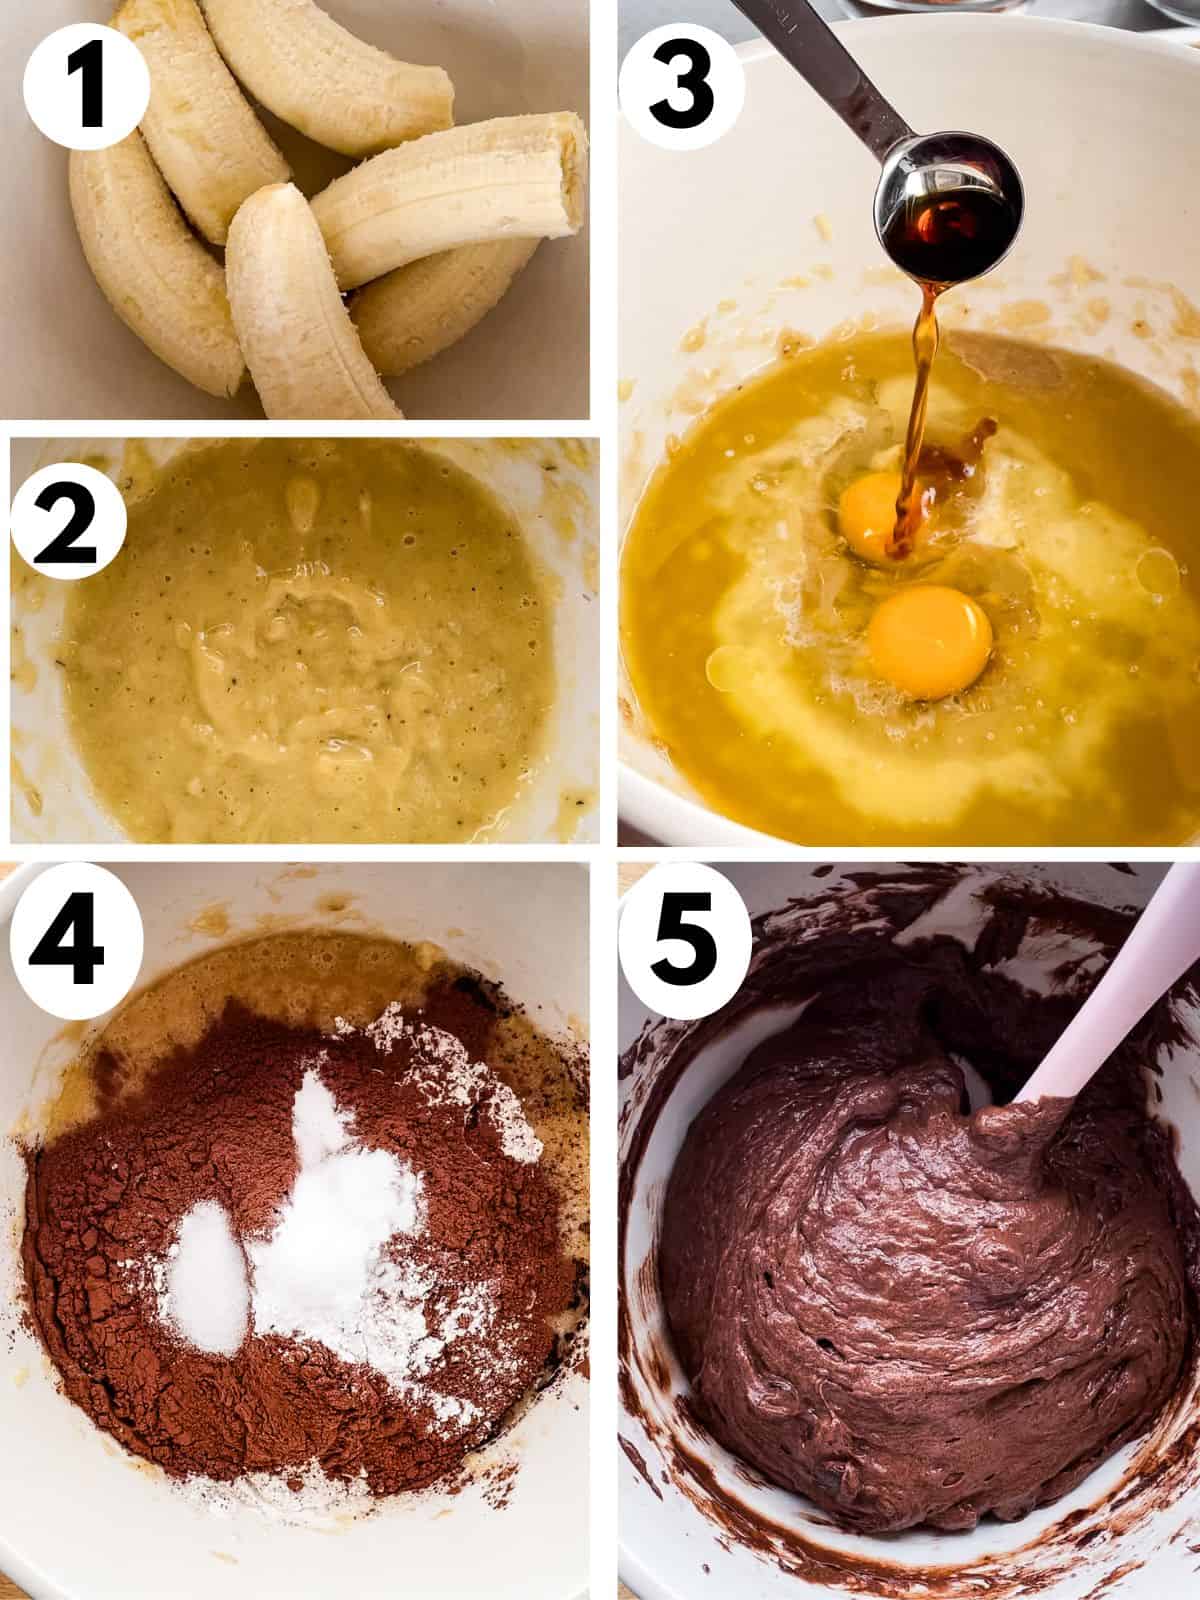 Steps for making chocolate banana muffin batter. 1. Ripe bananas in bowl. 2. Mashed bananas. 3. Adding butter, eggs, and vanilla extract. 4. Adding dry ingredients. 5. Batter mixed.